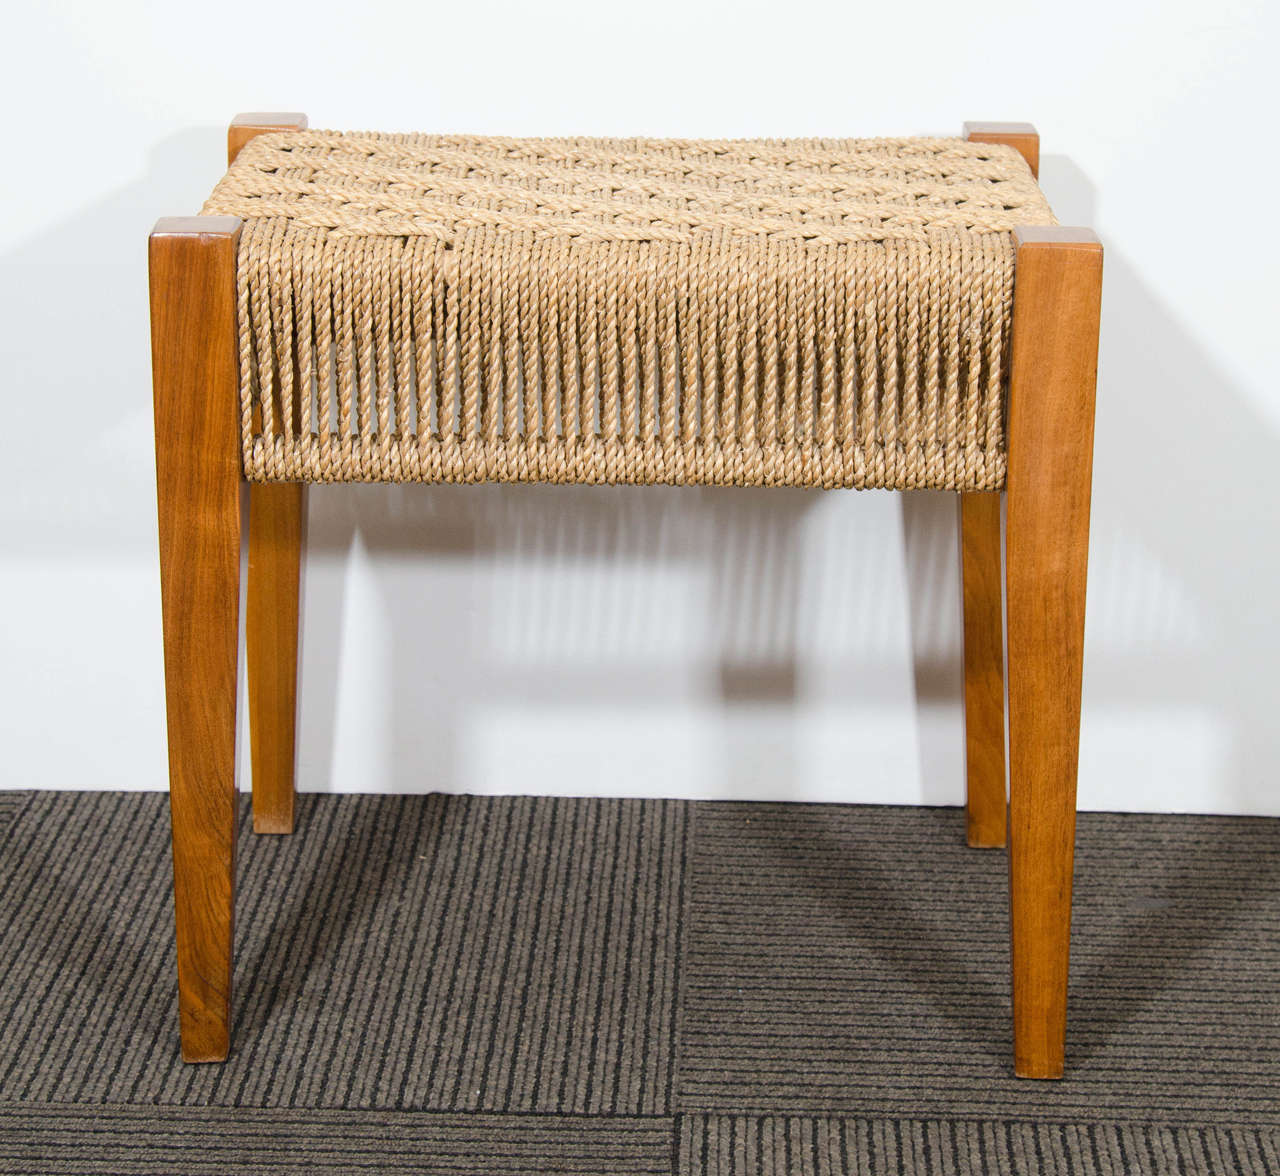 A vintage walnut bench or stool with woven seat in rope. Good vintage condition with age appropriate wear.